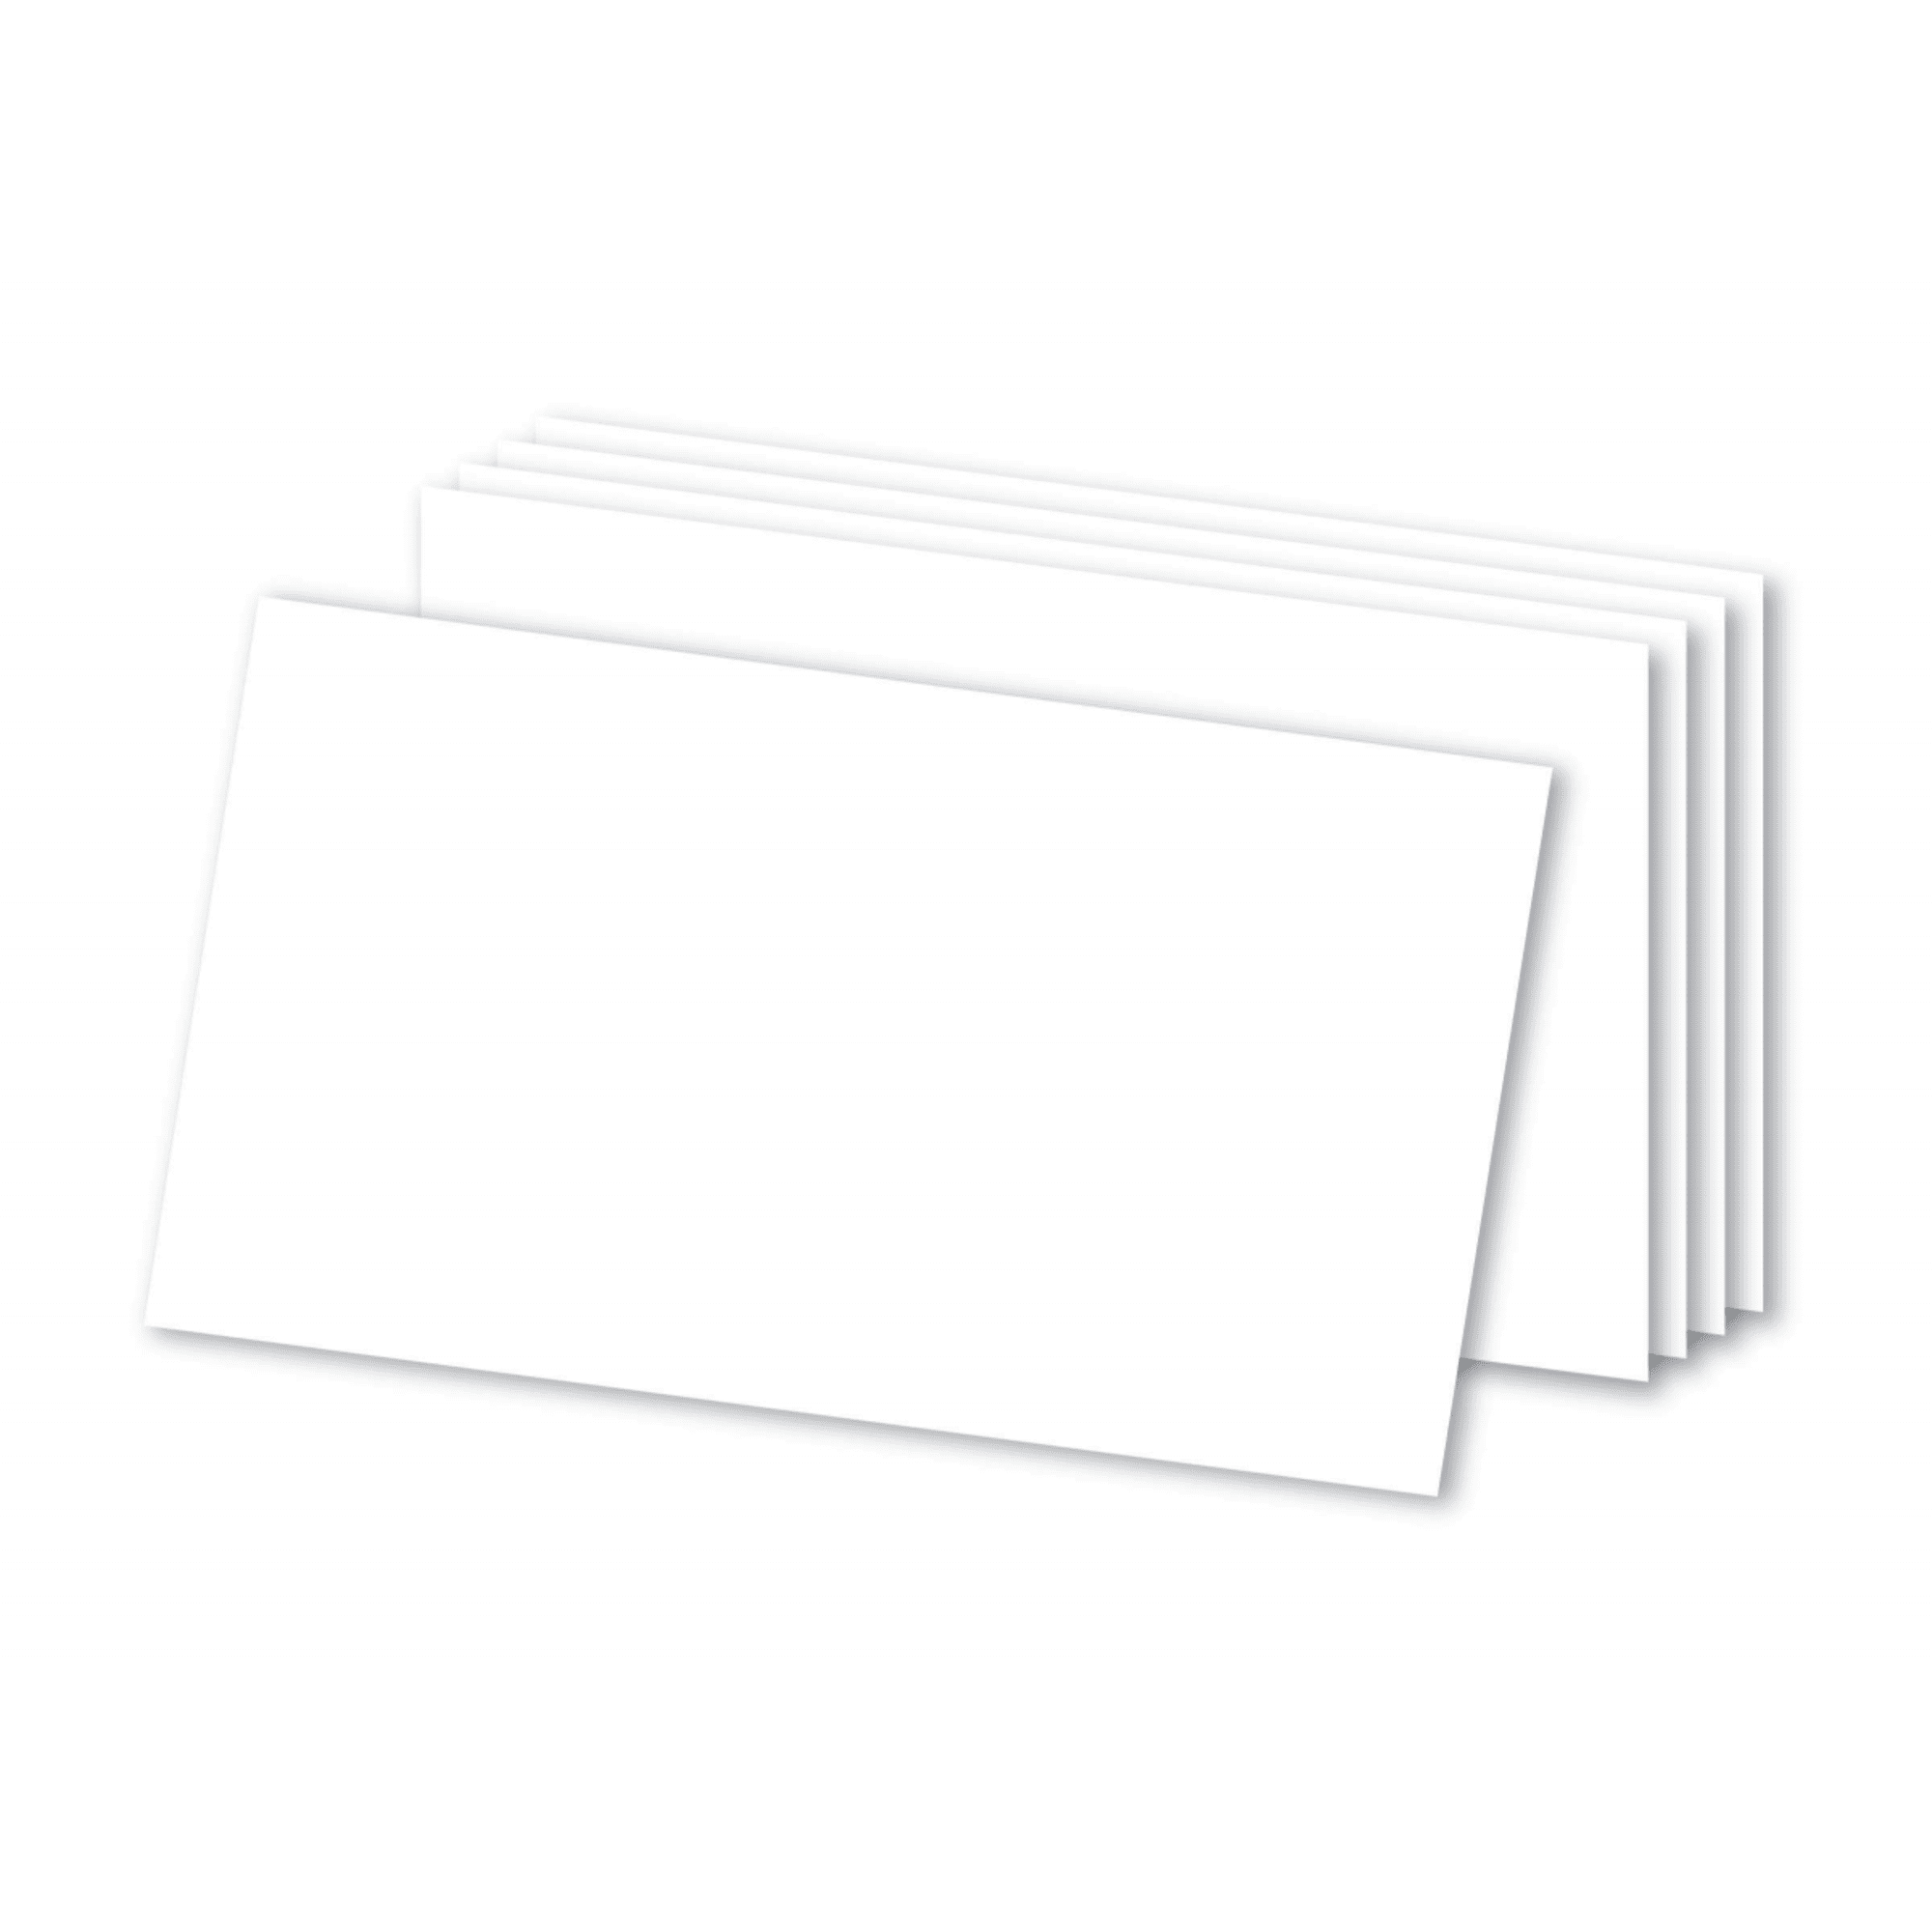 Office Depot Brand Blank Index Cards 3 x 5 White Pack Of 100 - Office Depot